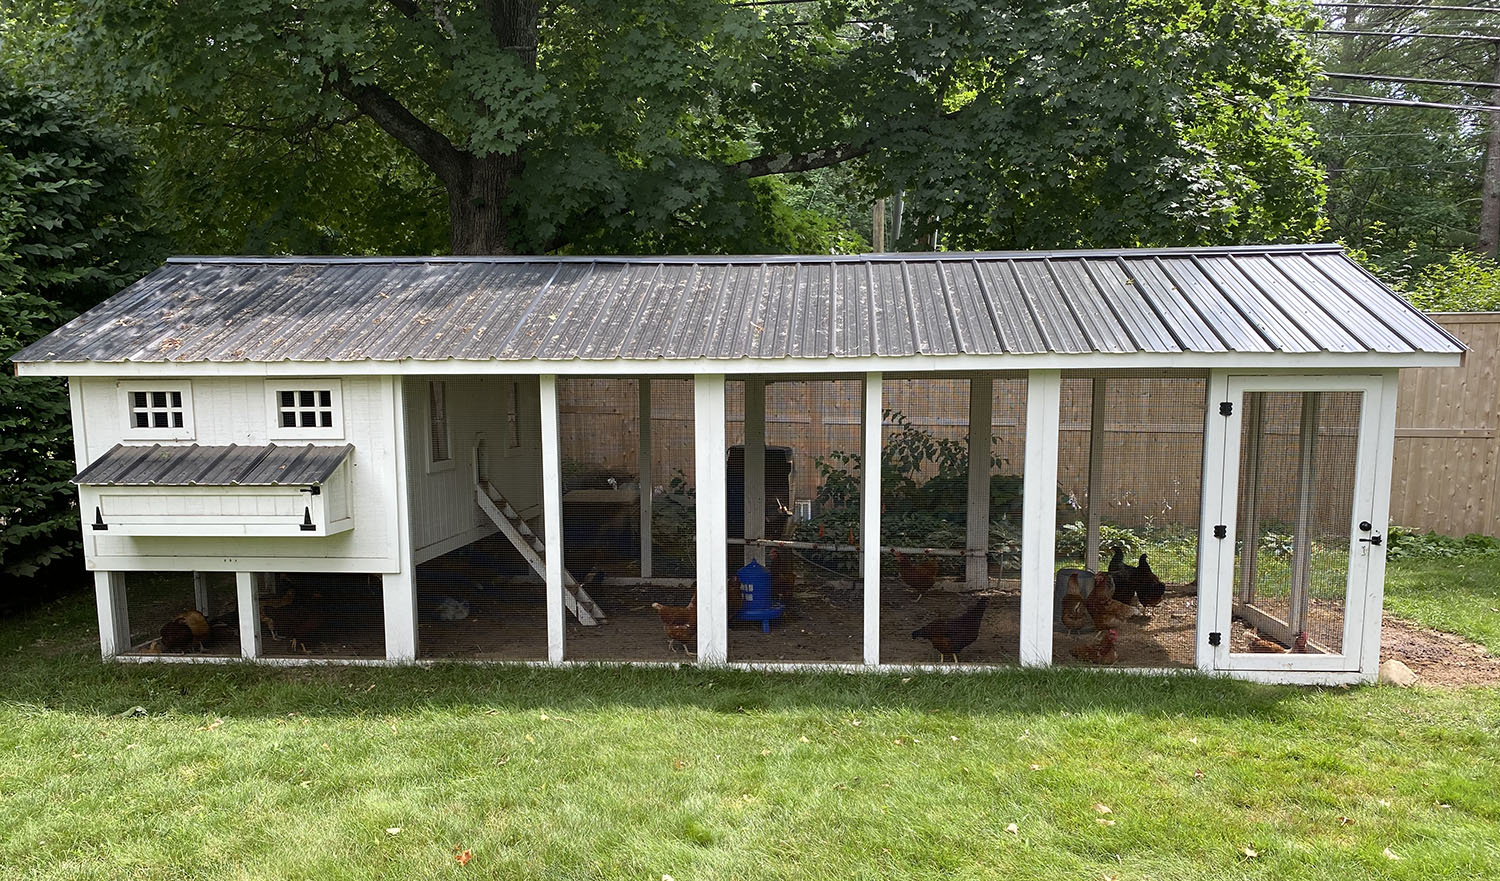 10'x24' Carolina Coop in Peterborough, NH with sandwiched walls and gutters and rain barrel poultry water system